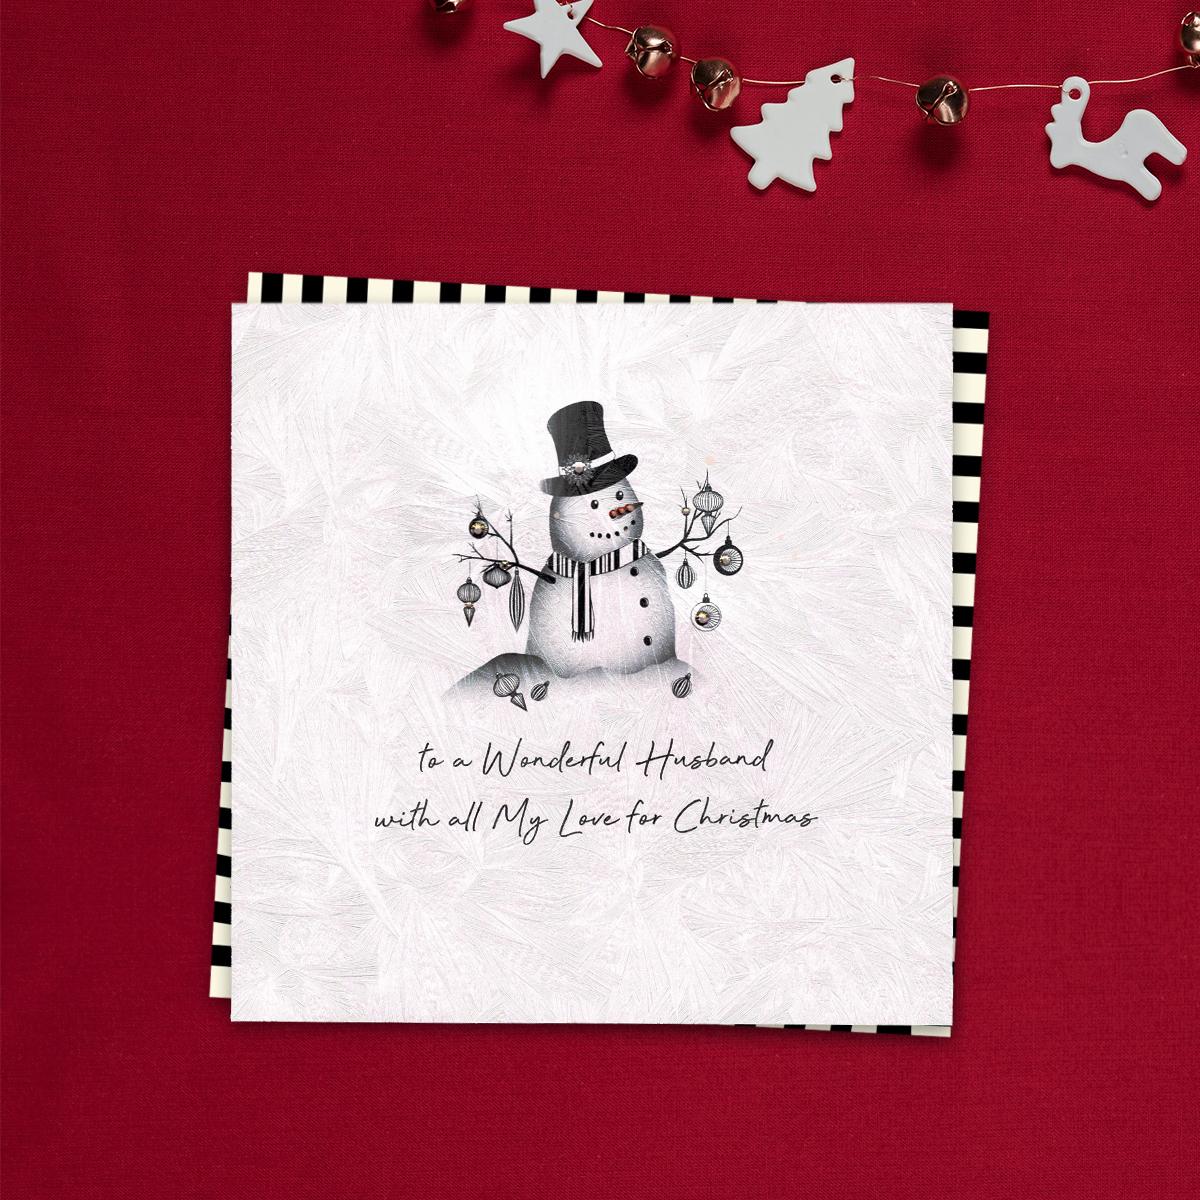 To A Wonderful Husband With All My Love For Christmas Featuring A Beatiful, Decorated snowman On A Background Of Shattered Ice! Finished With Jewel Embellishments, This Handcrafted Card Is Simply Stunning. Blank Inside For Your Own Message. White Envelope With Black Striped Border